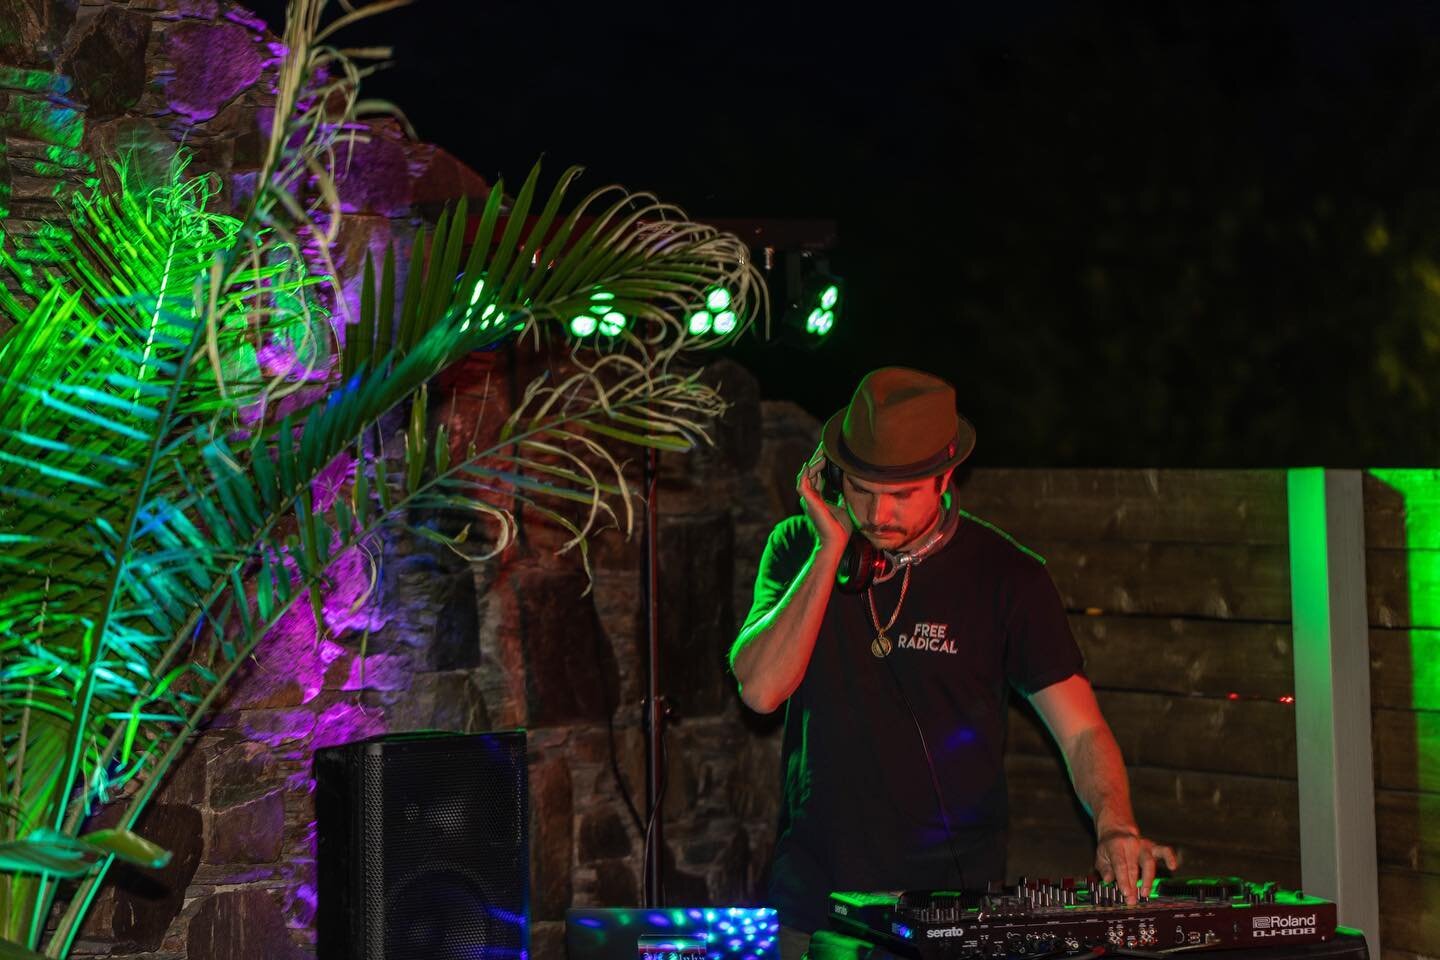 Another shot of @alfalpha from Saturday night at @gigispalmsprings! So much more to come this summer here in the desert. Check his Instagram weekly for performance dates. @supersonidosistema #palmsprings #palmspringslife #nightlife #dj #djset #artist